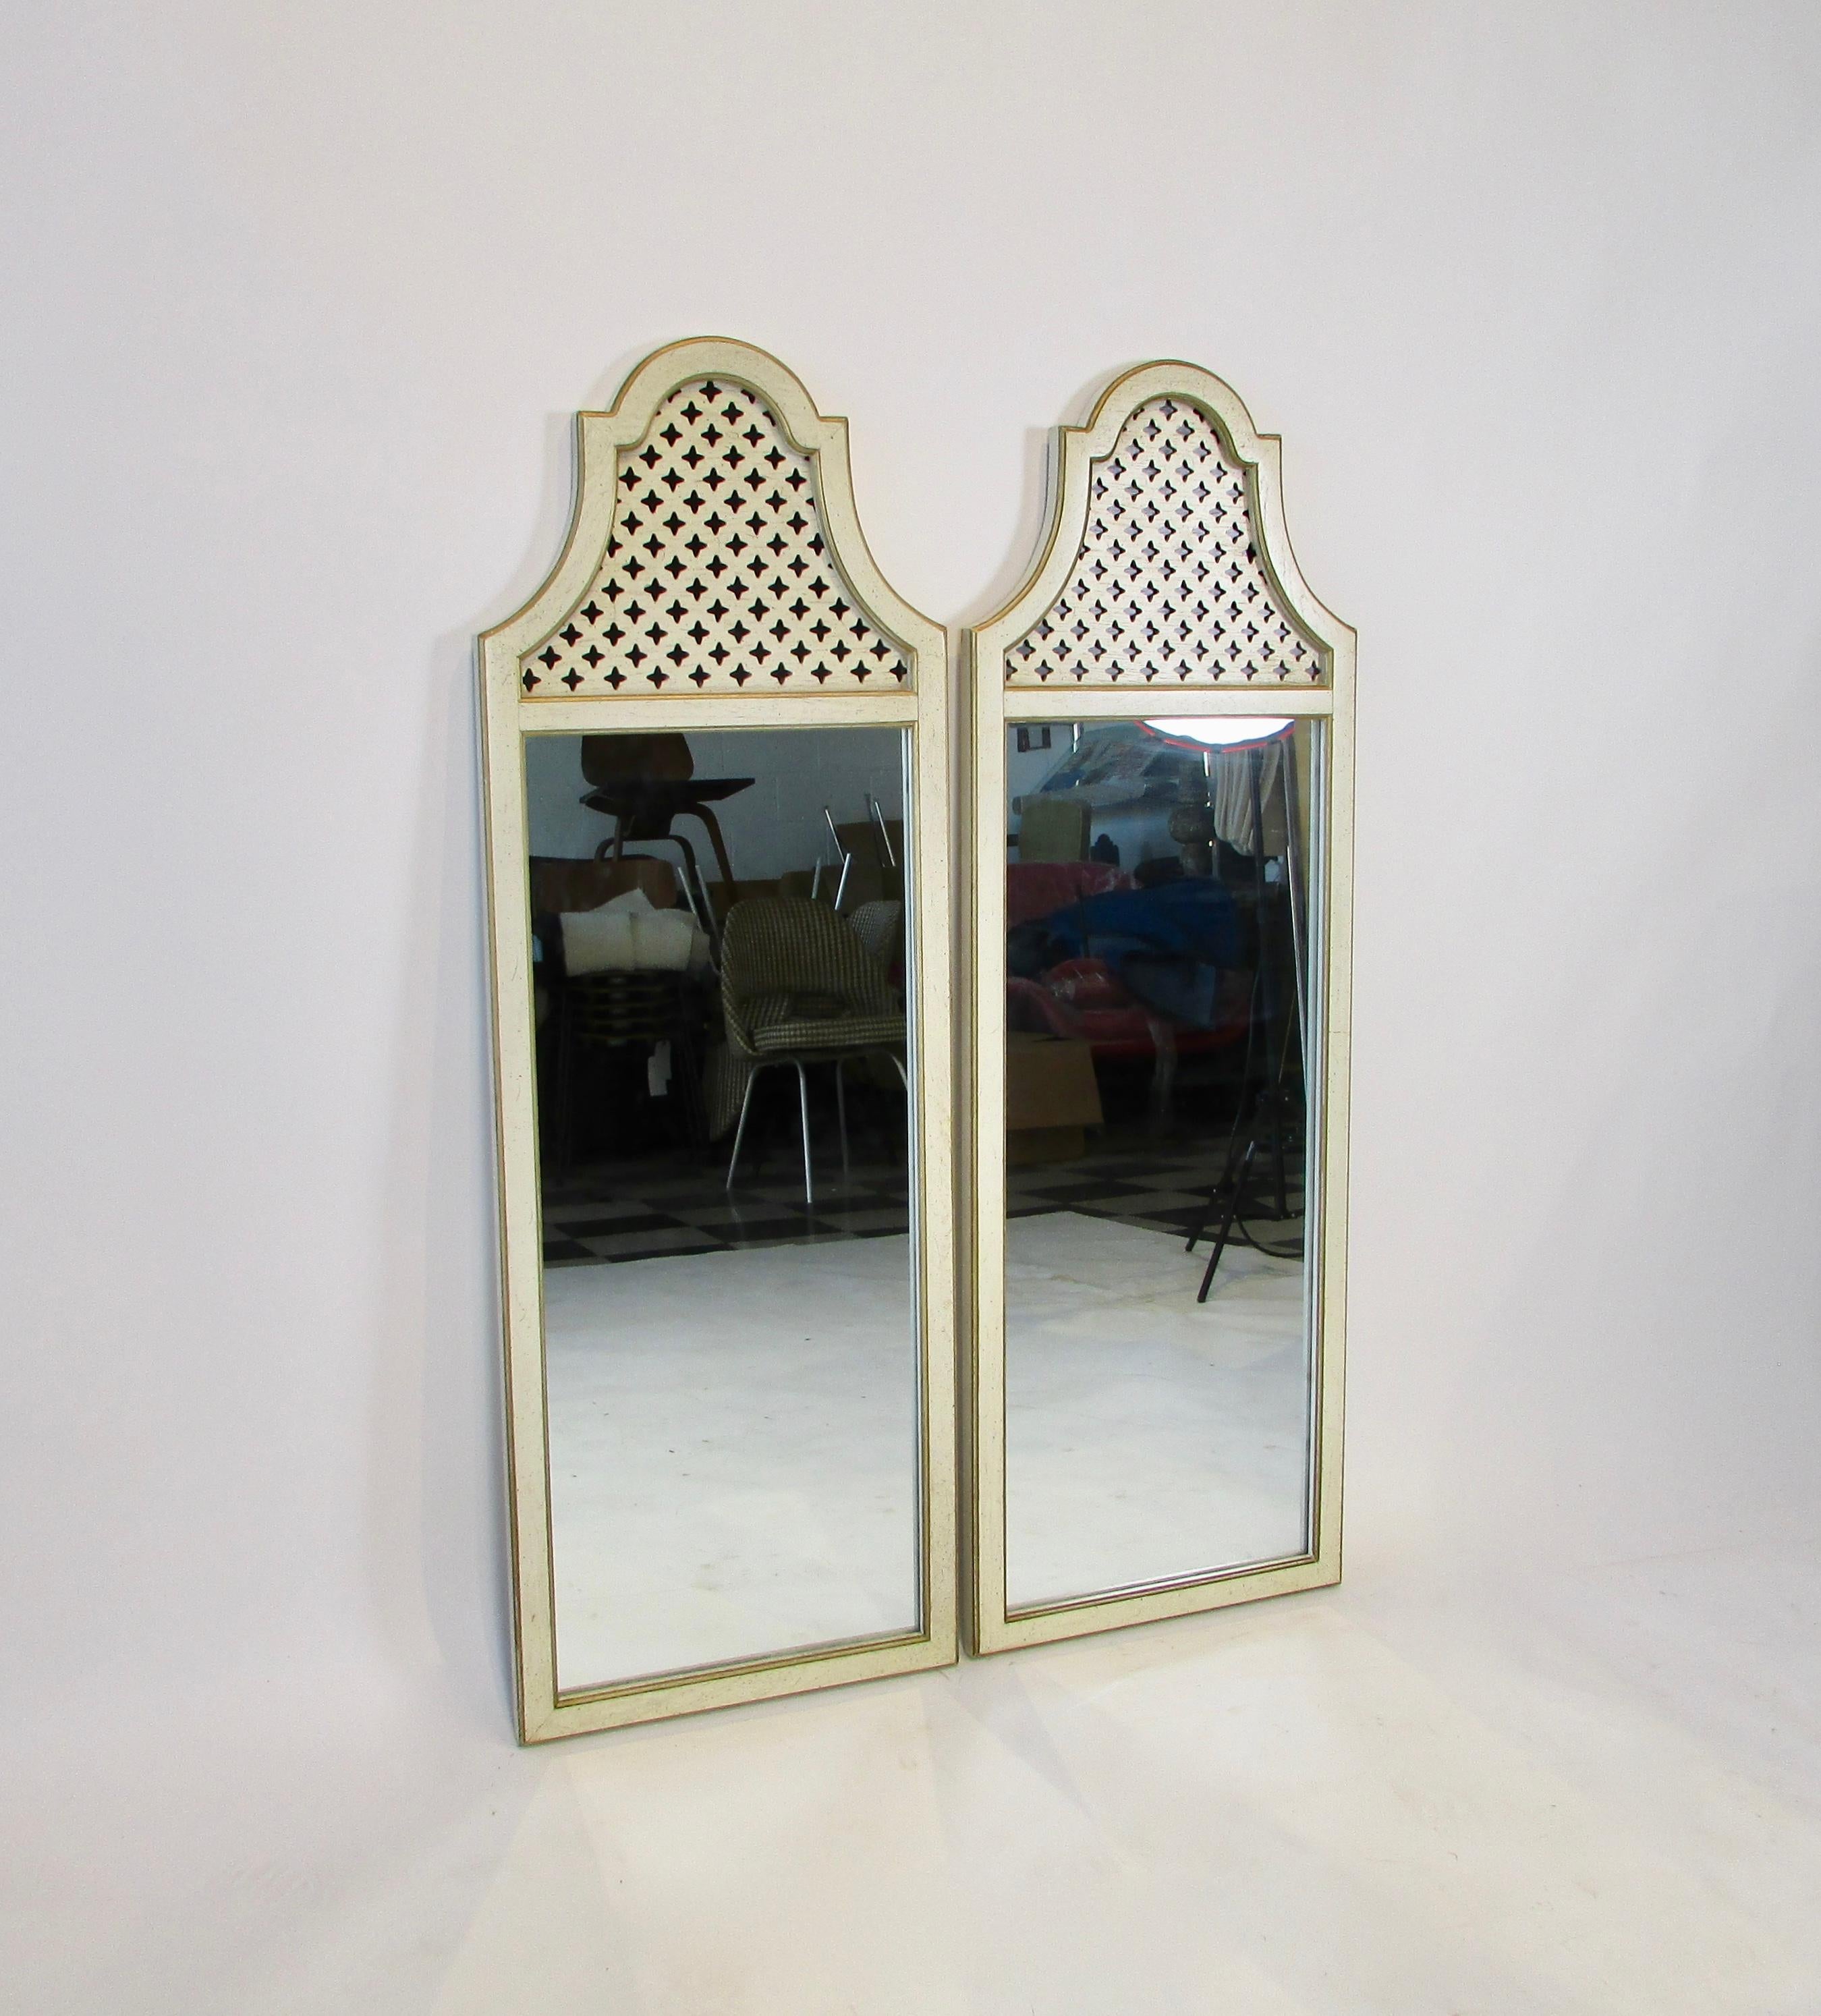 A pair of 1950s Hollywood Regency fretwork style wall mirrors. Creamy white with black speckled wood frames with gold trim outline and enhance the frames' shape. A star fretwork design reveals a black background.  These work well above a pair of